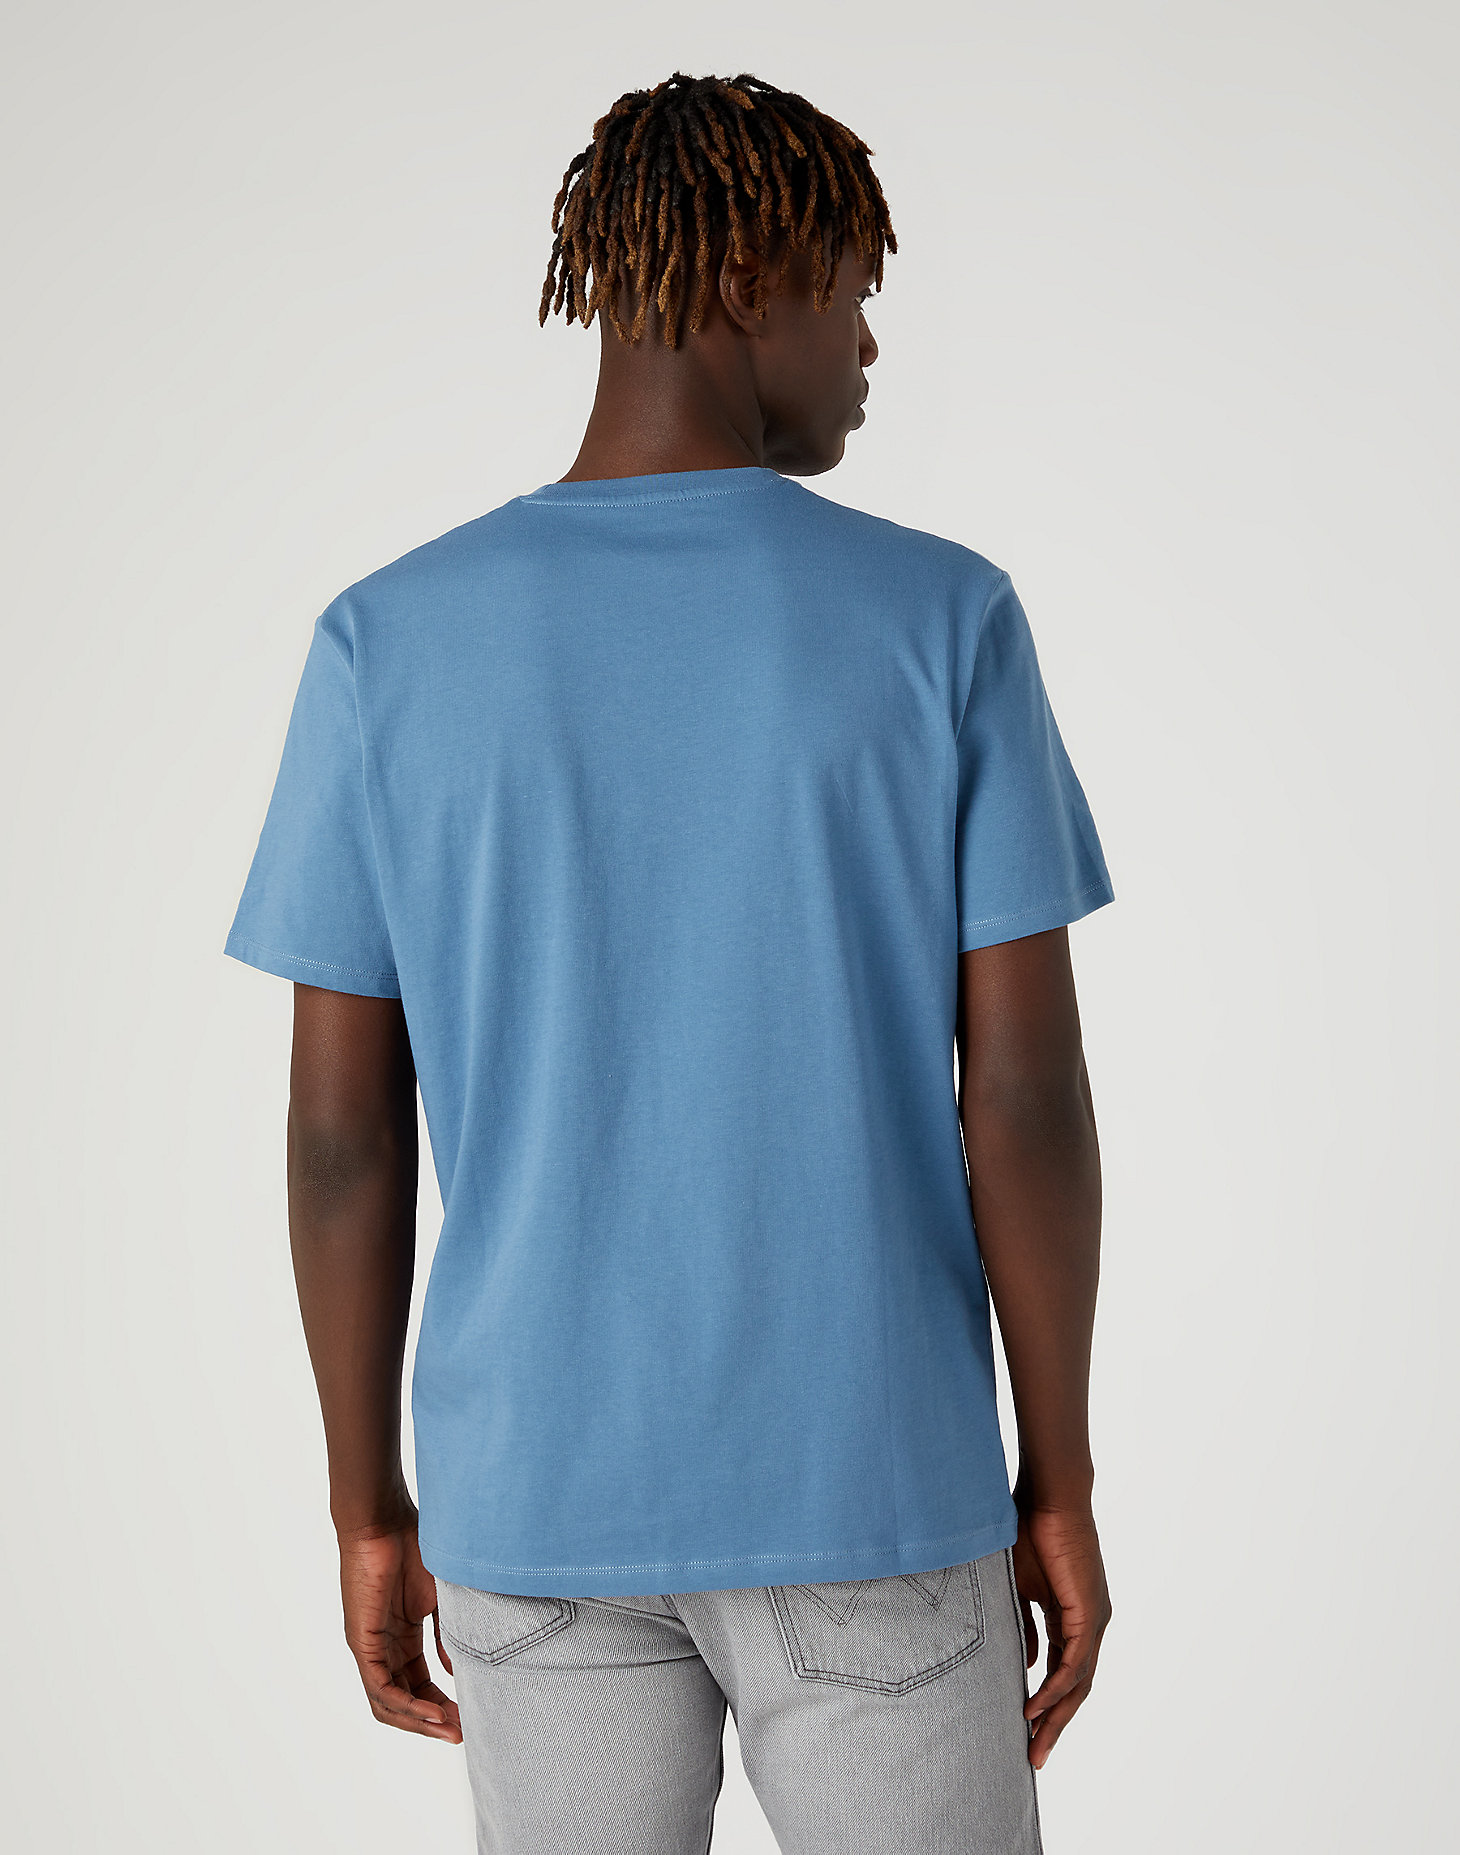 Graphic Tee in Captains Blue alternative view 2